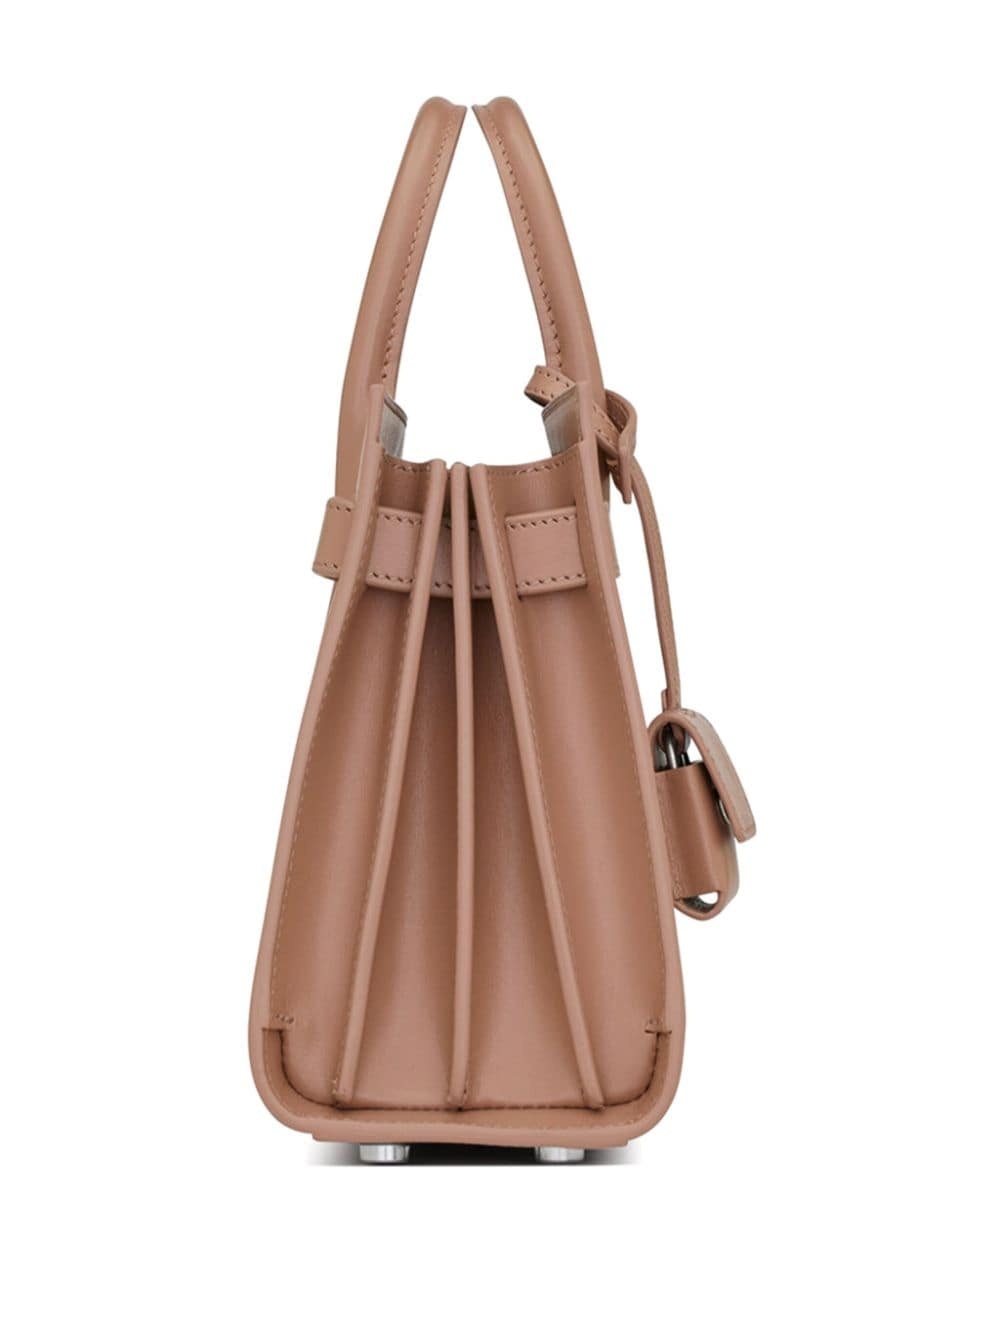 small Sac de Jour leather tote bag - 4